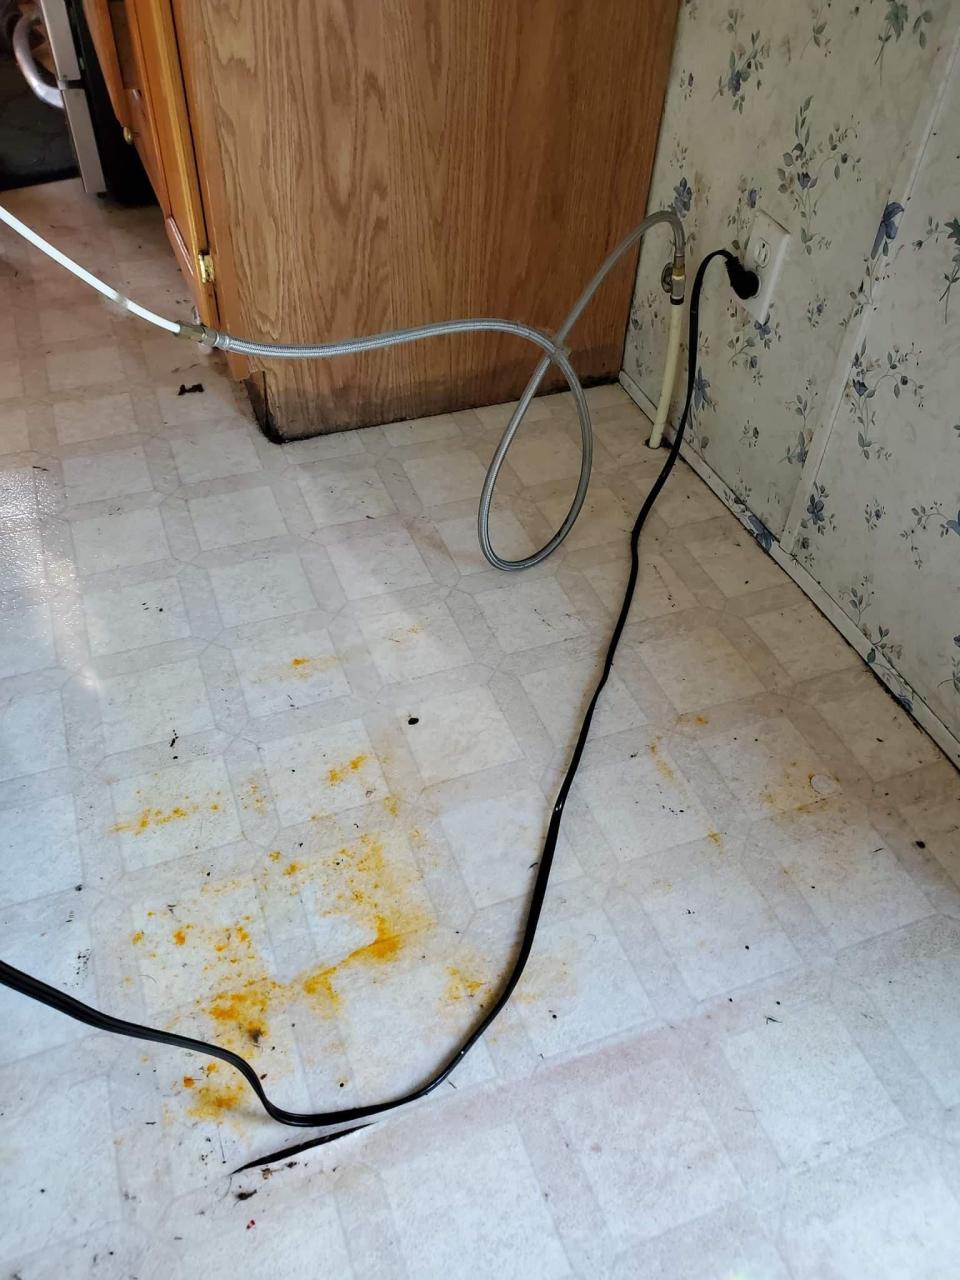 Jennifer Berg took this photo she says depicts water damage from her Samsung refrigerator.